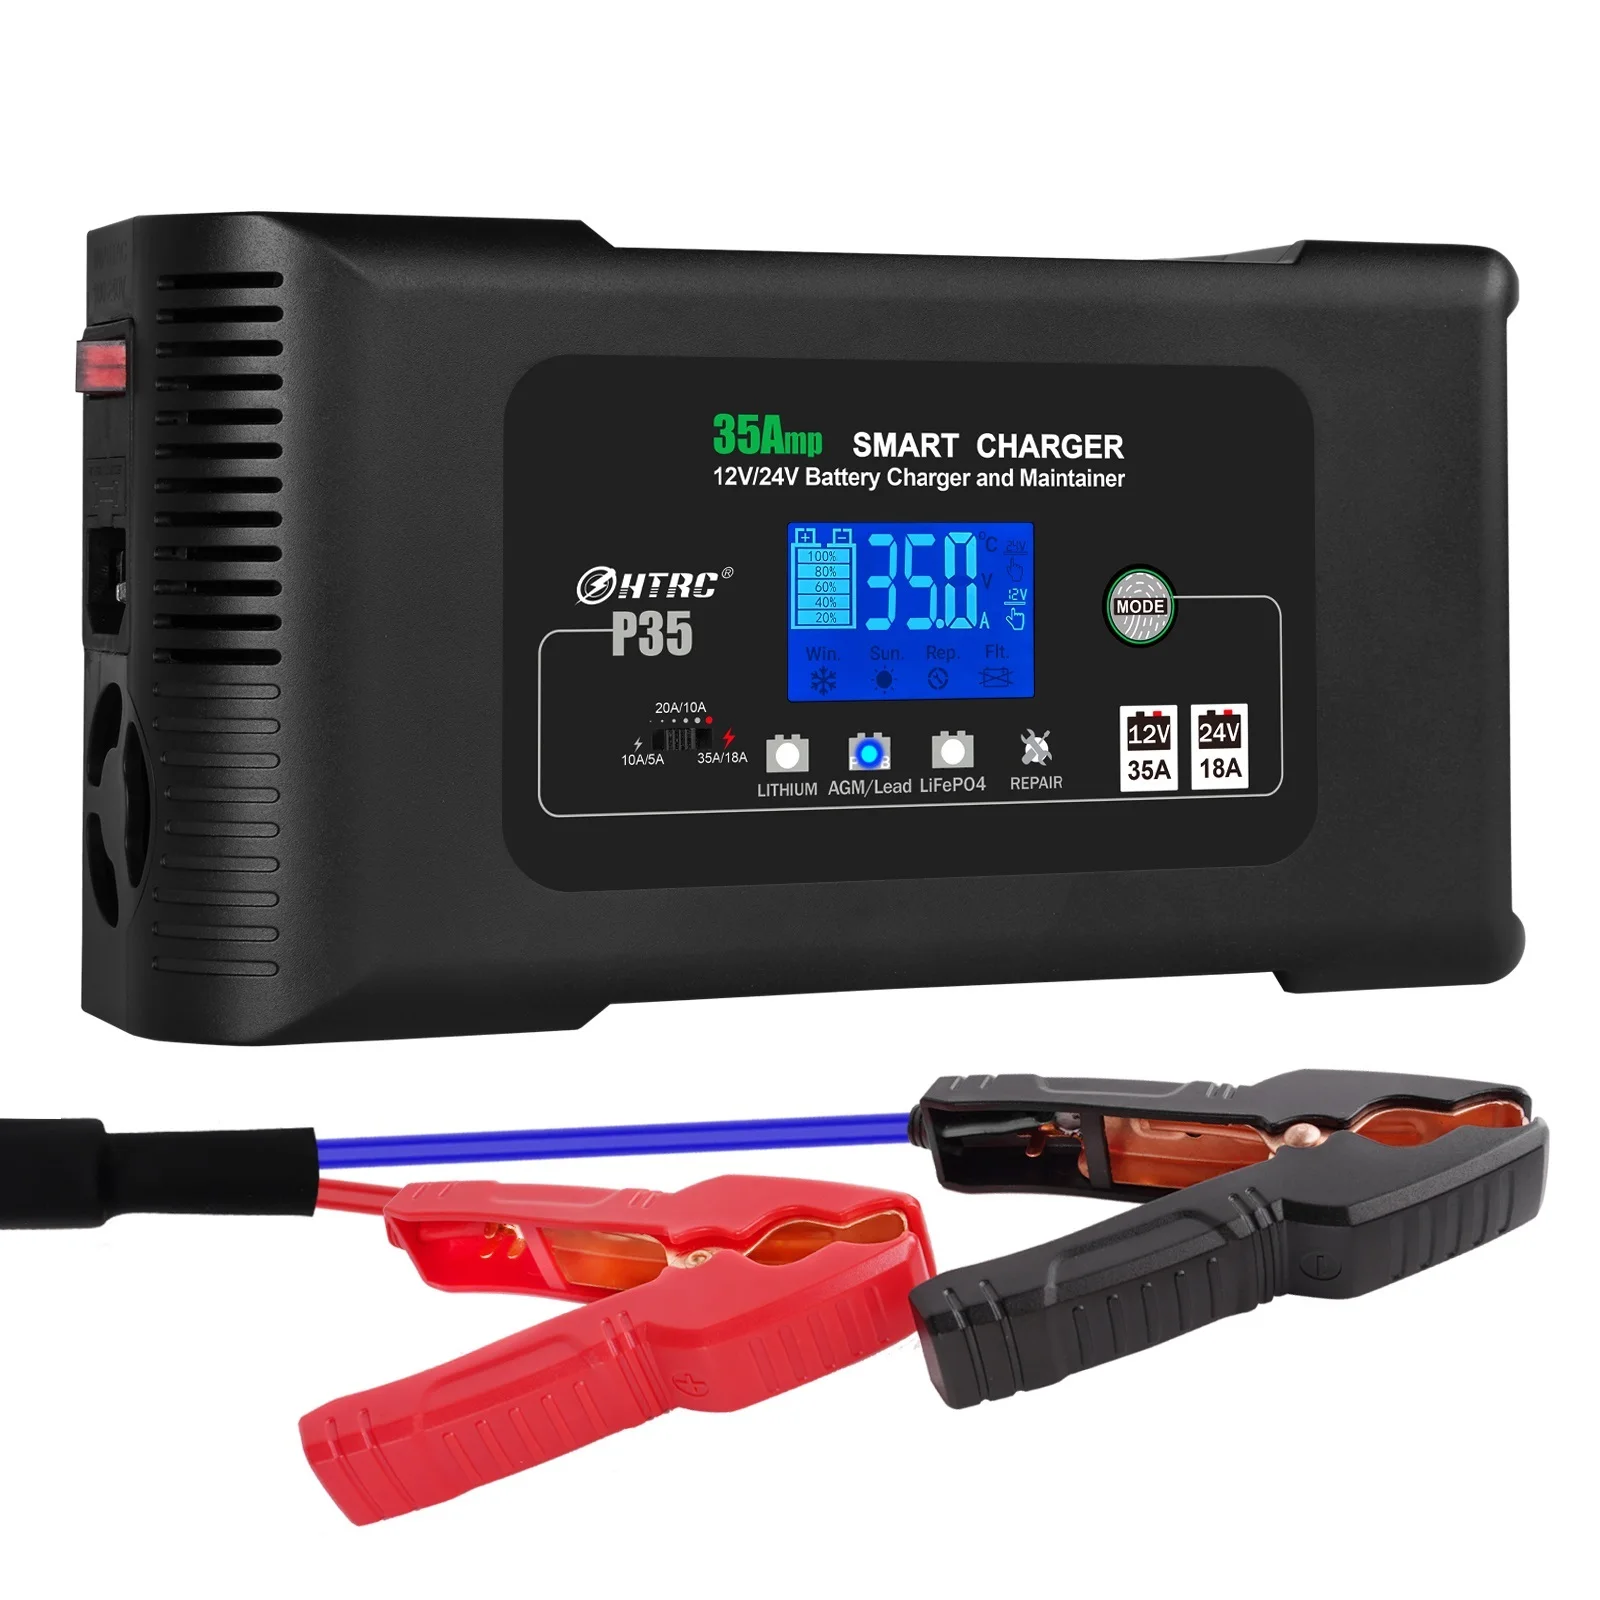 

Top Large Power 35A 12V 24V Car Battery Charger for Auto Moto Truck Motorcycle AGM Lead Acid PB GEL LCD Display Smart Charging